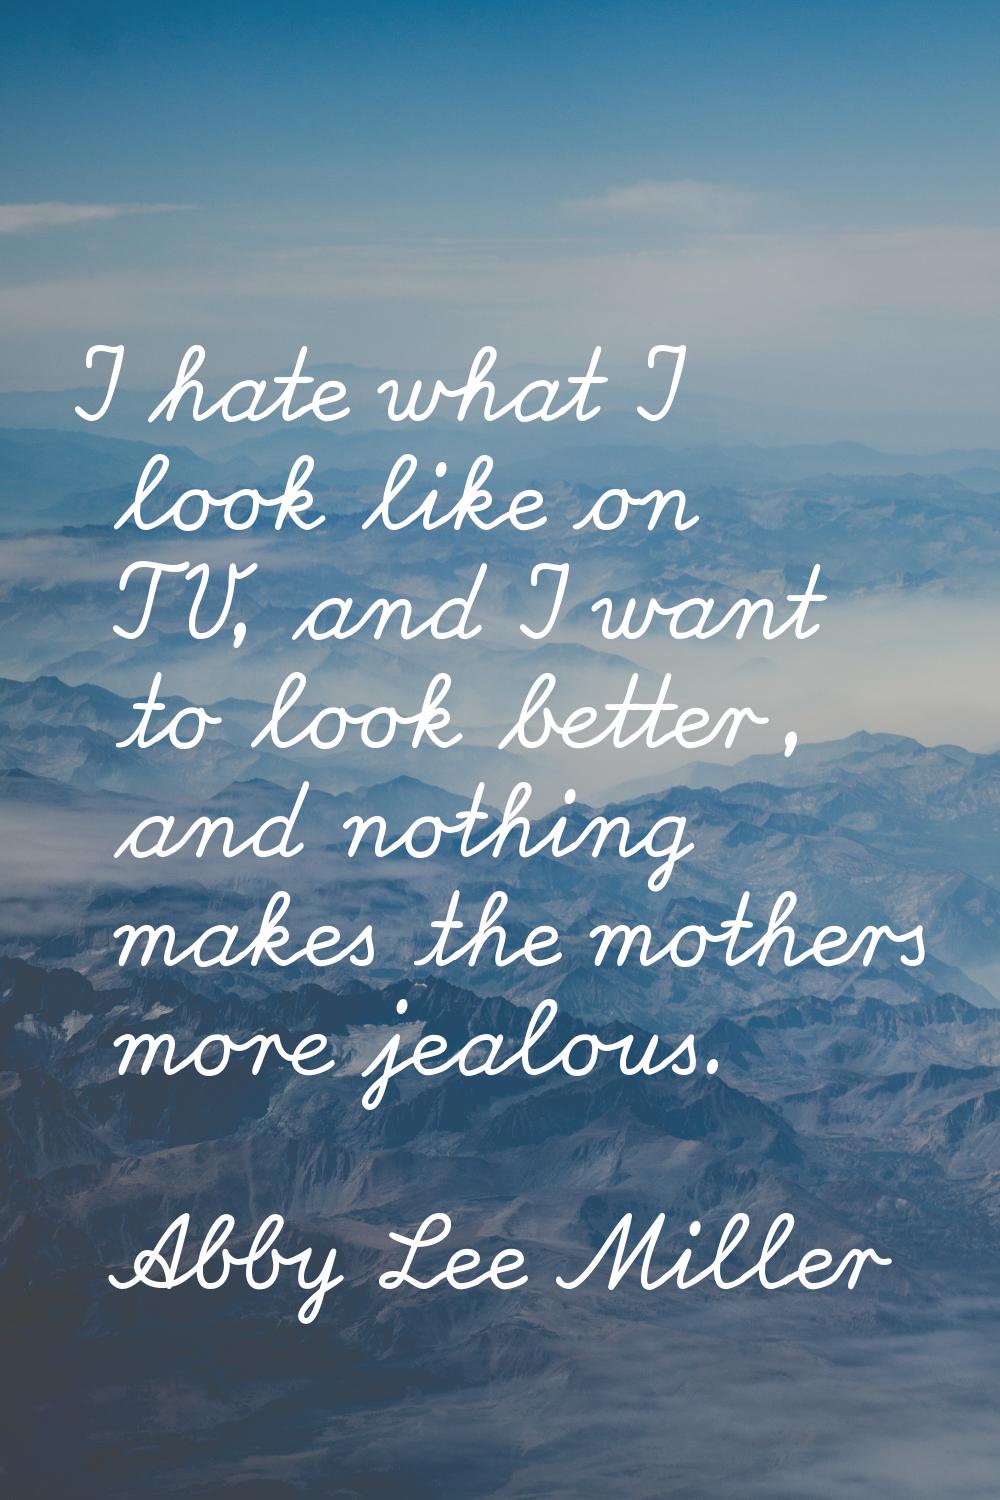 I hate what I look like on TV, and I want to look better, and nothing makes the mothers more jealou